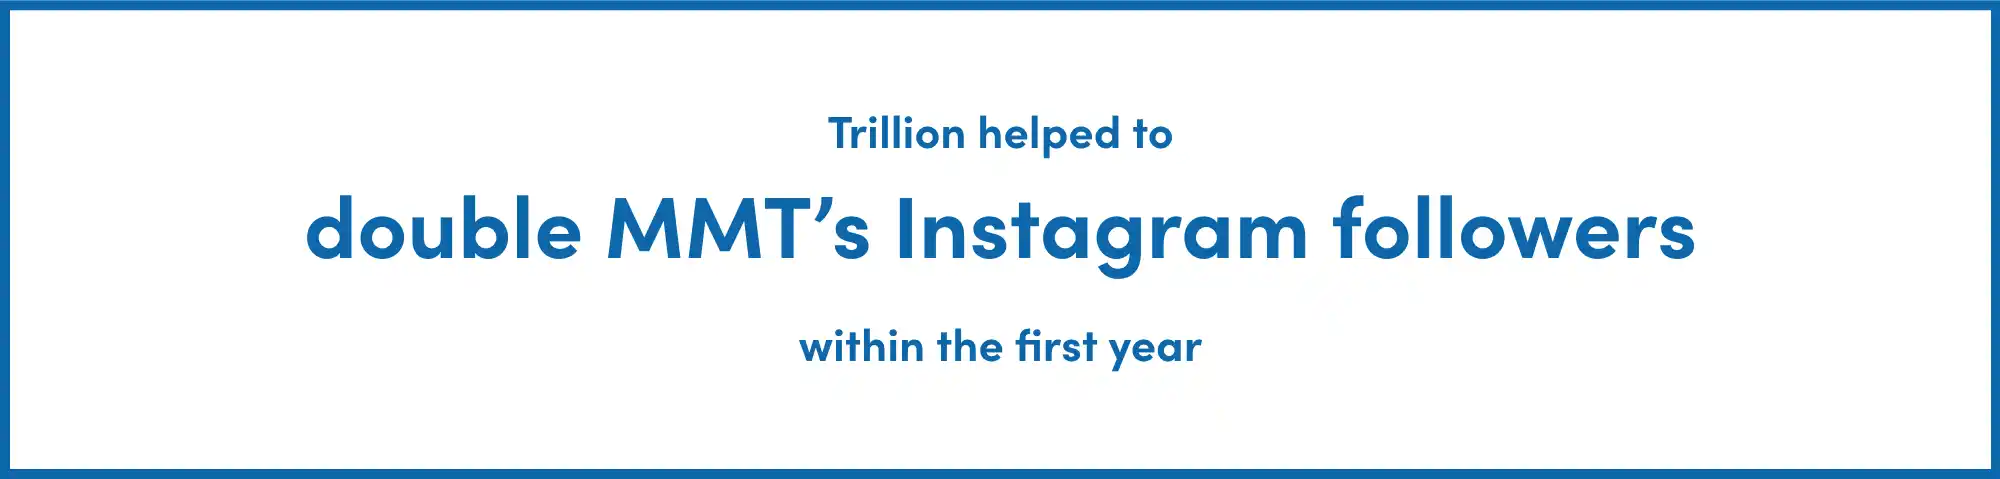 Trillion helped to double MMT’s Instagram followers within the first year